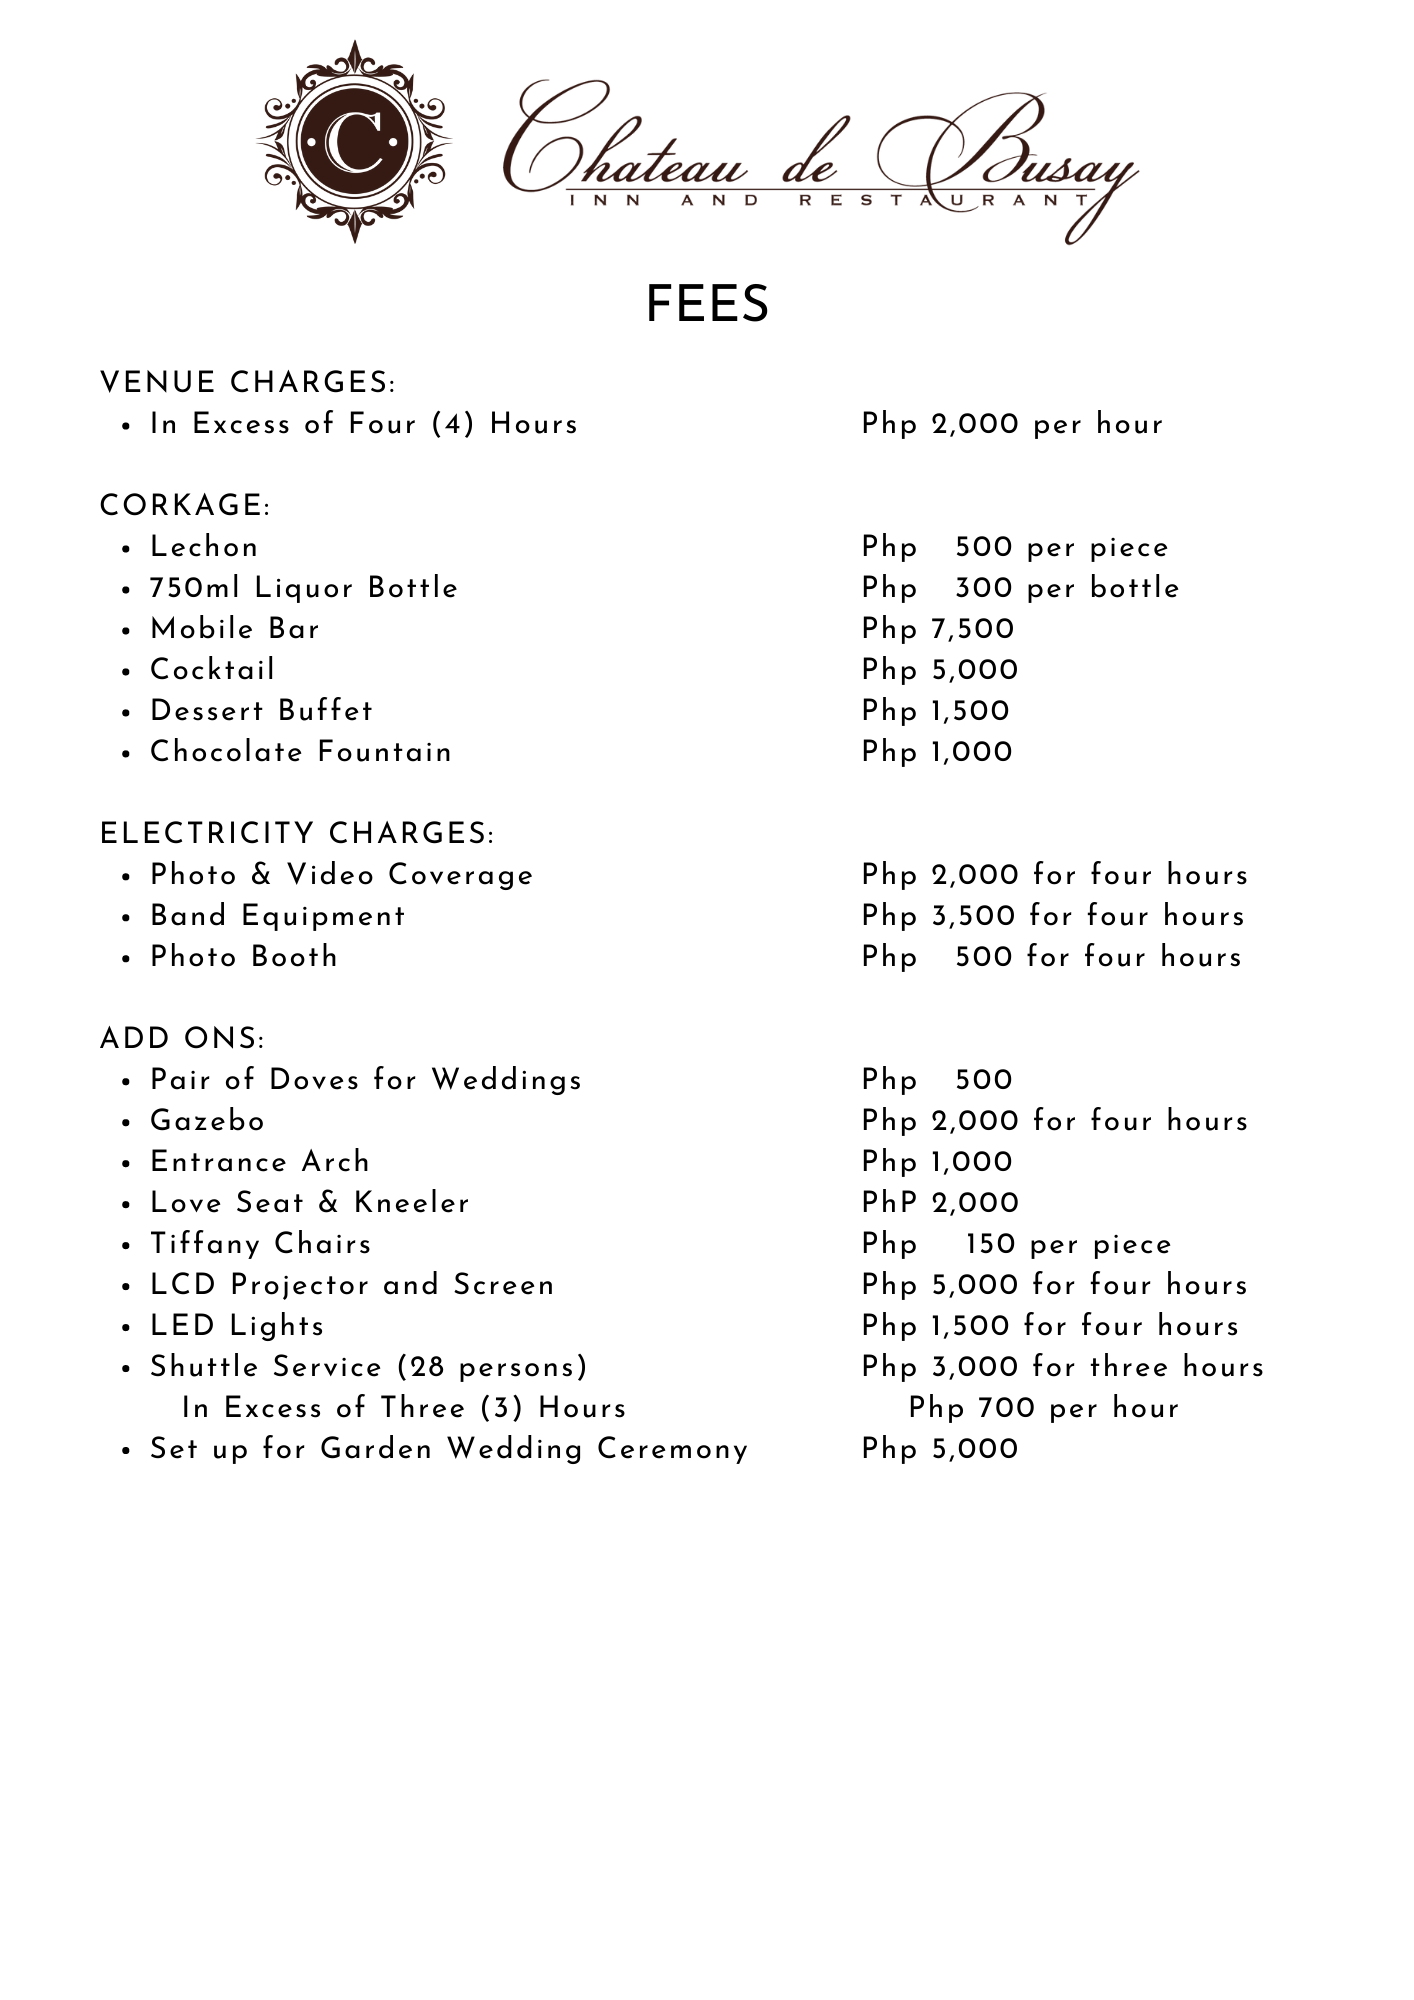 Other Fees